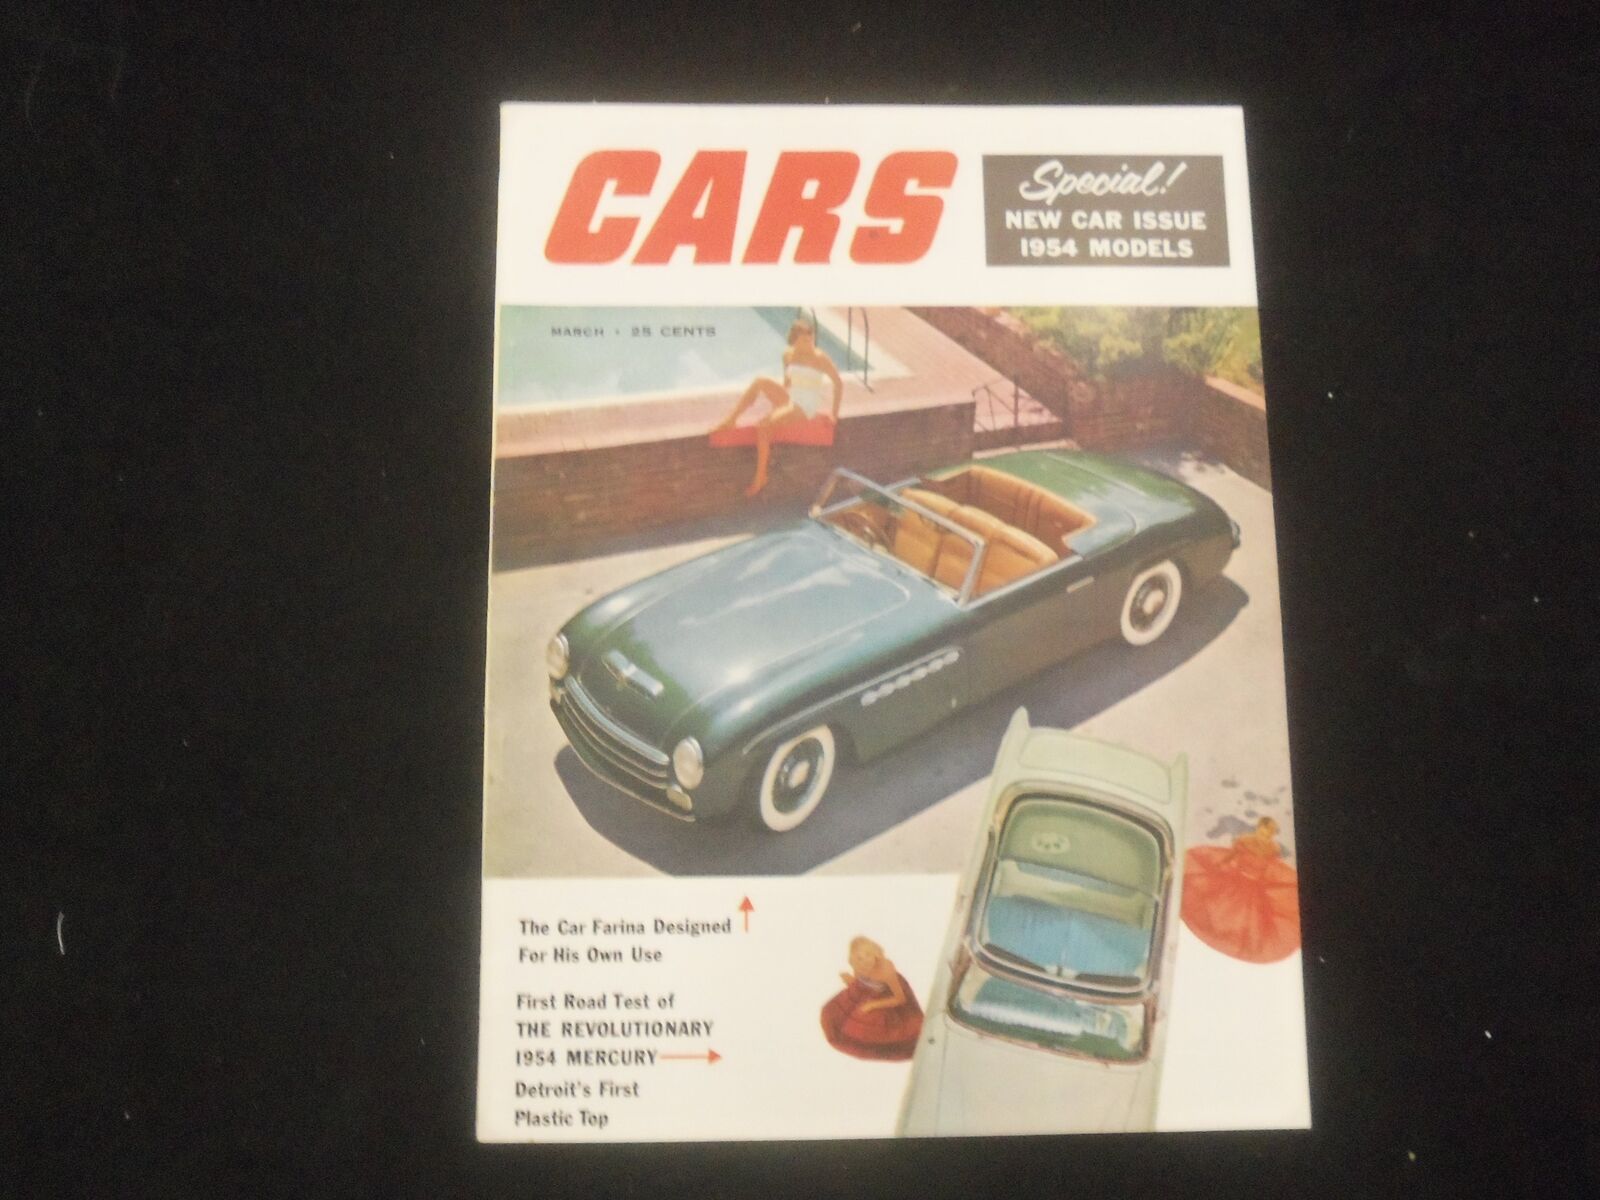 1954 MARCH CARS MAGAZINE - NEW CAR ISSUE 1954 MODELS - J 7818